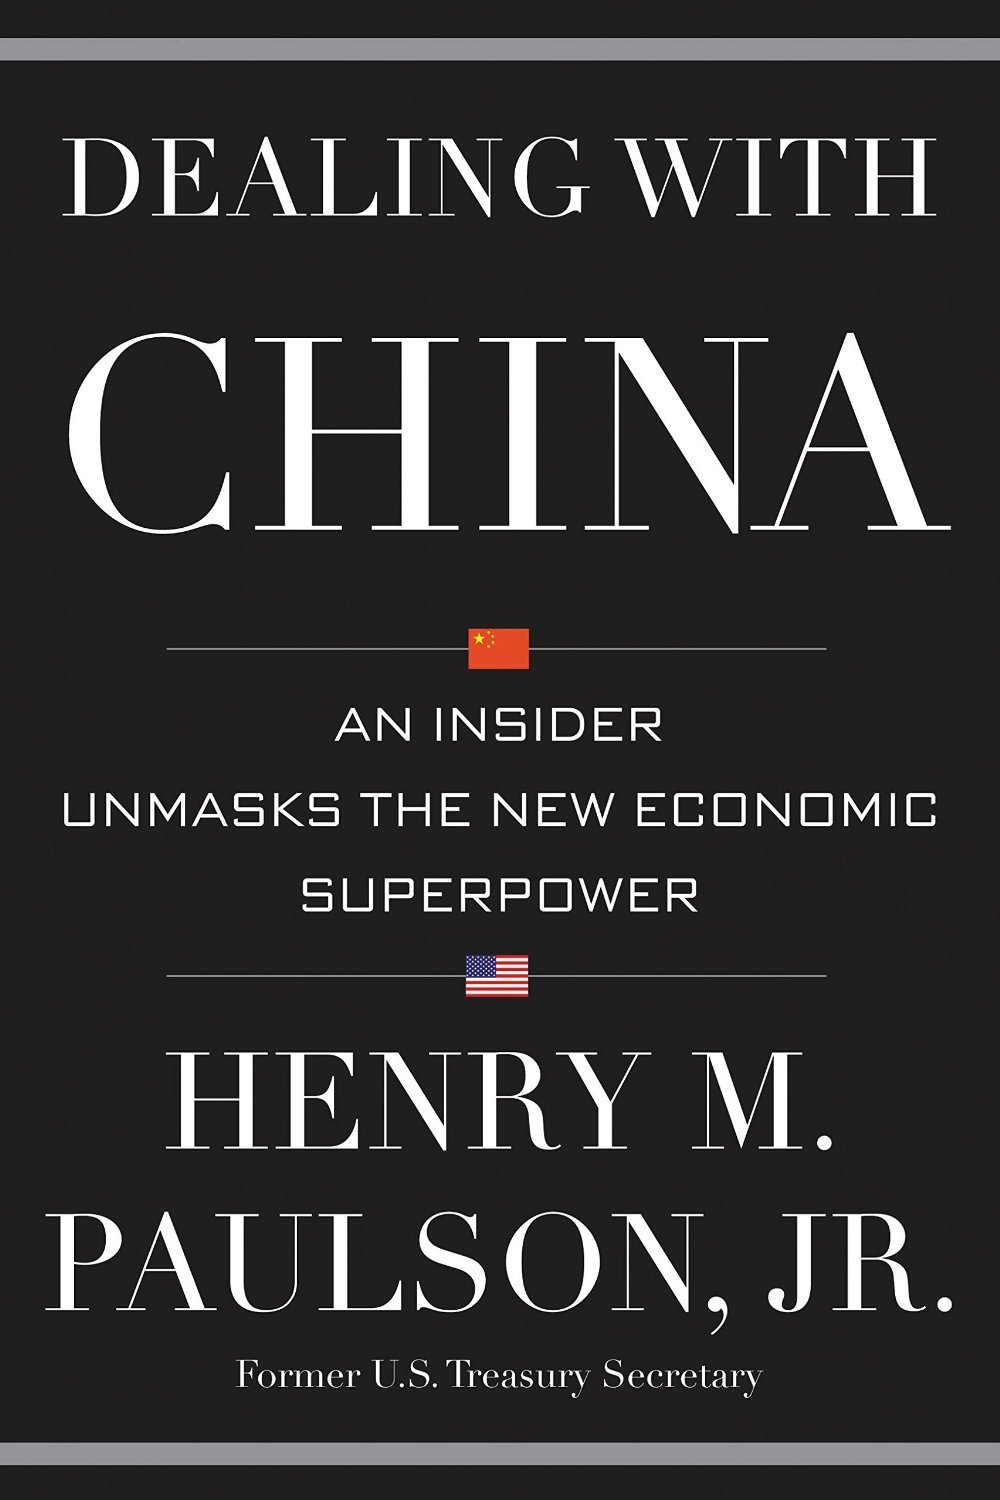 Dealing with china by henry m paulson jr